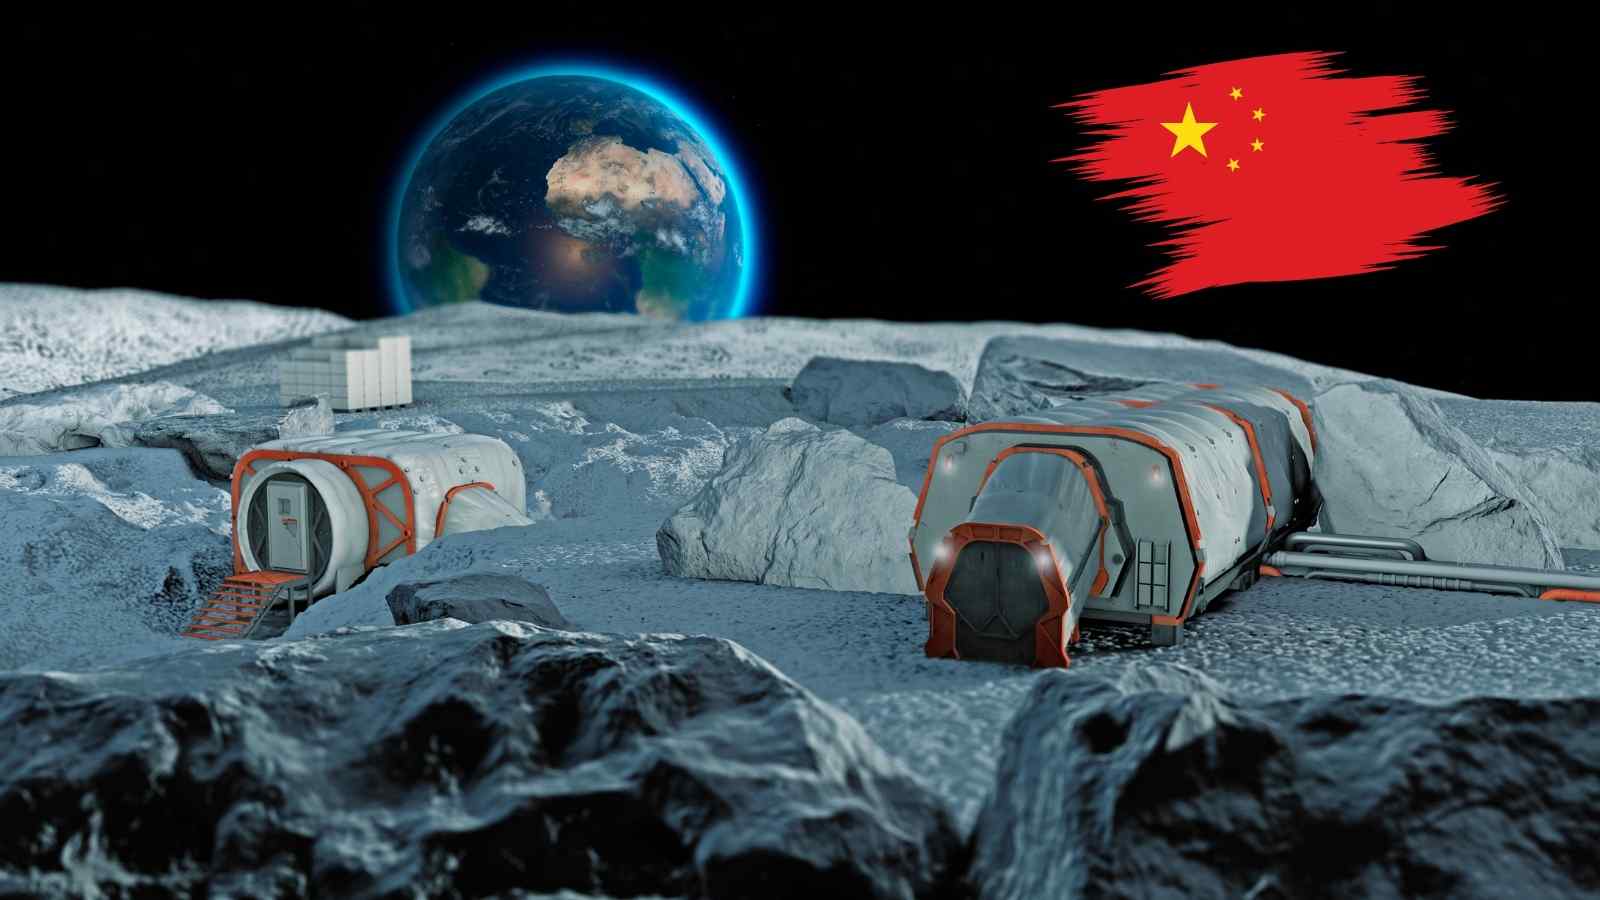 China has big dreams: a moon base in a space future